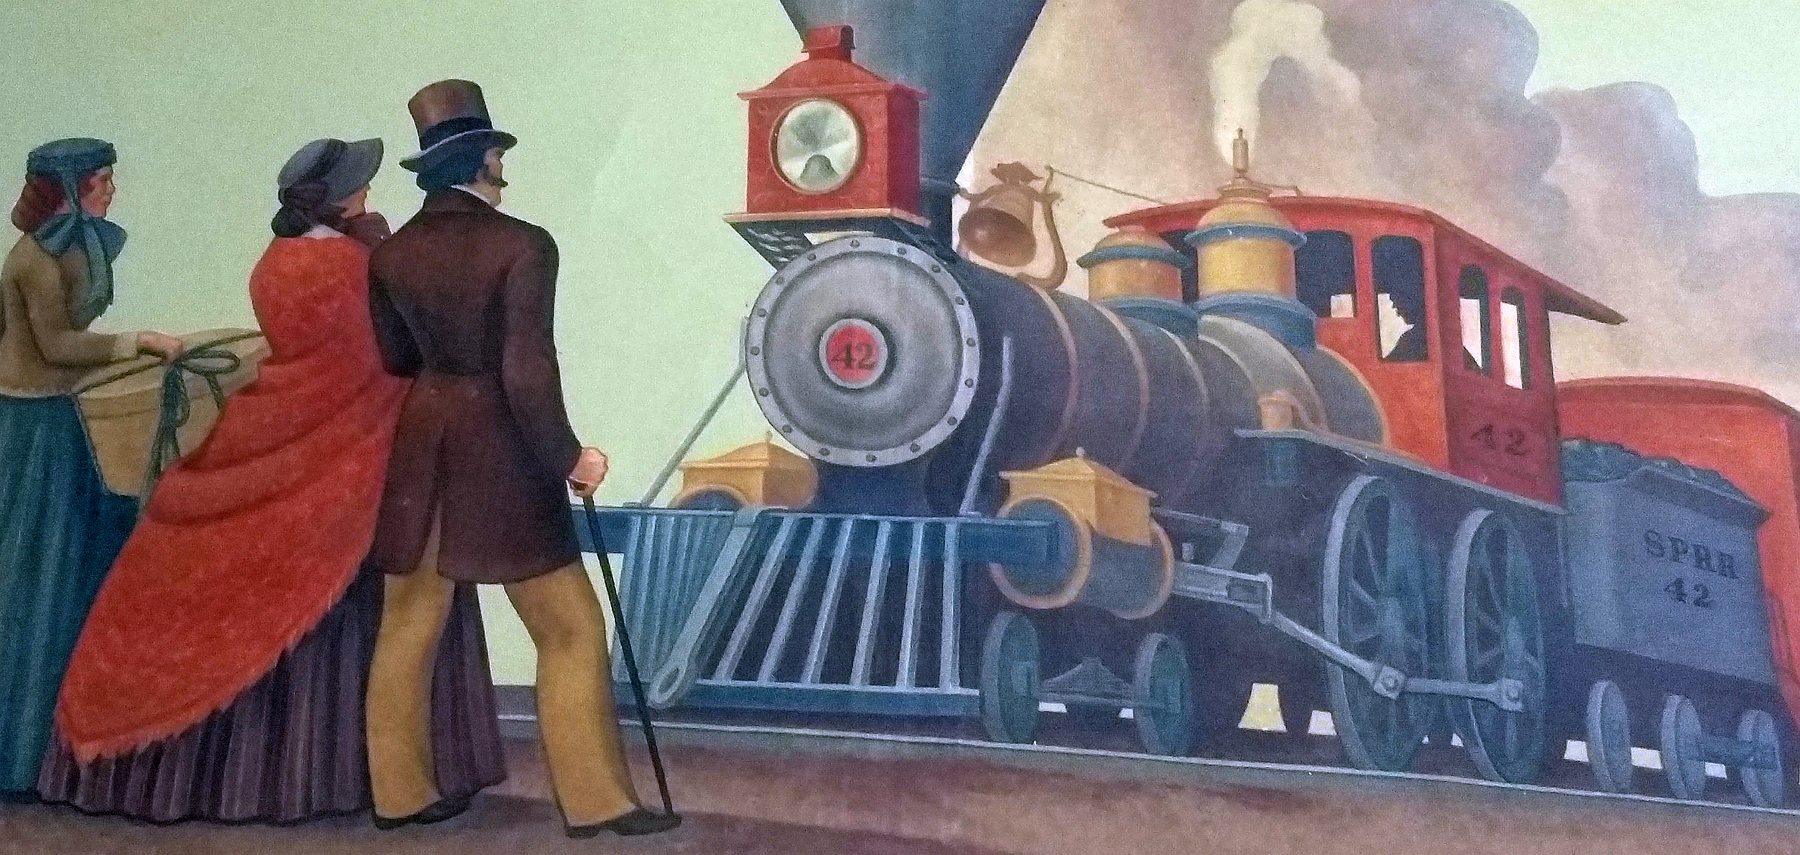 Edith Hamlin's "Days Of First Railroad" (Detail Image)